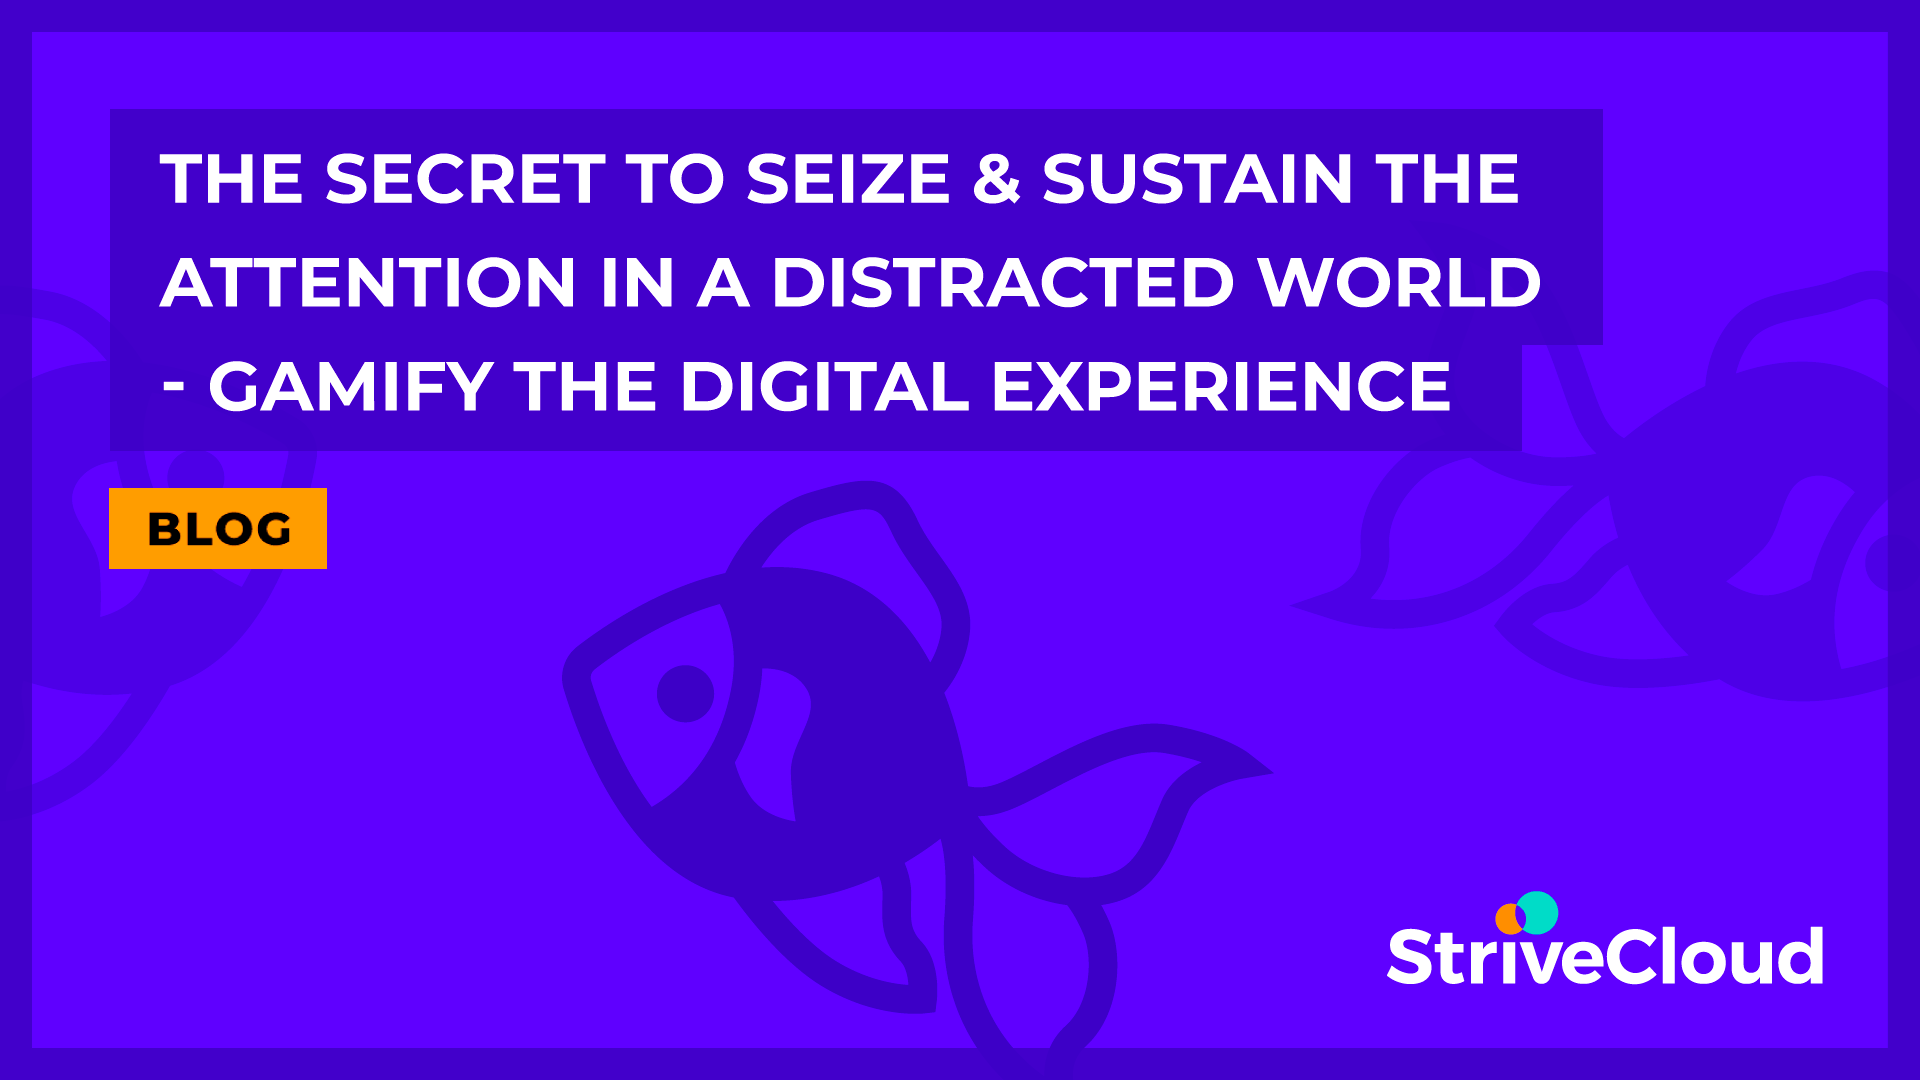 seize-and-sustain-attention-in-distracted-world-gamification-digital-engagement